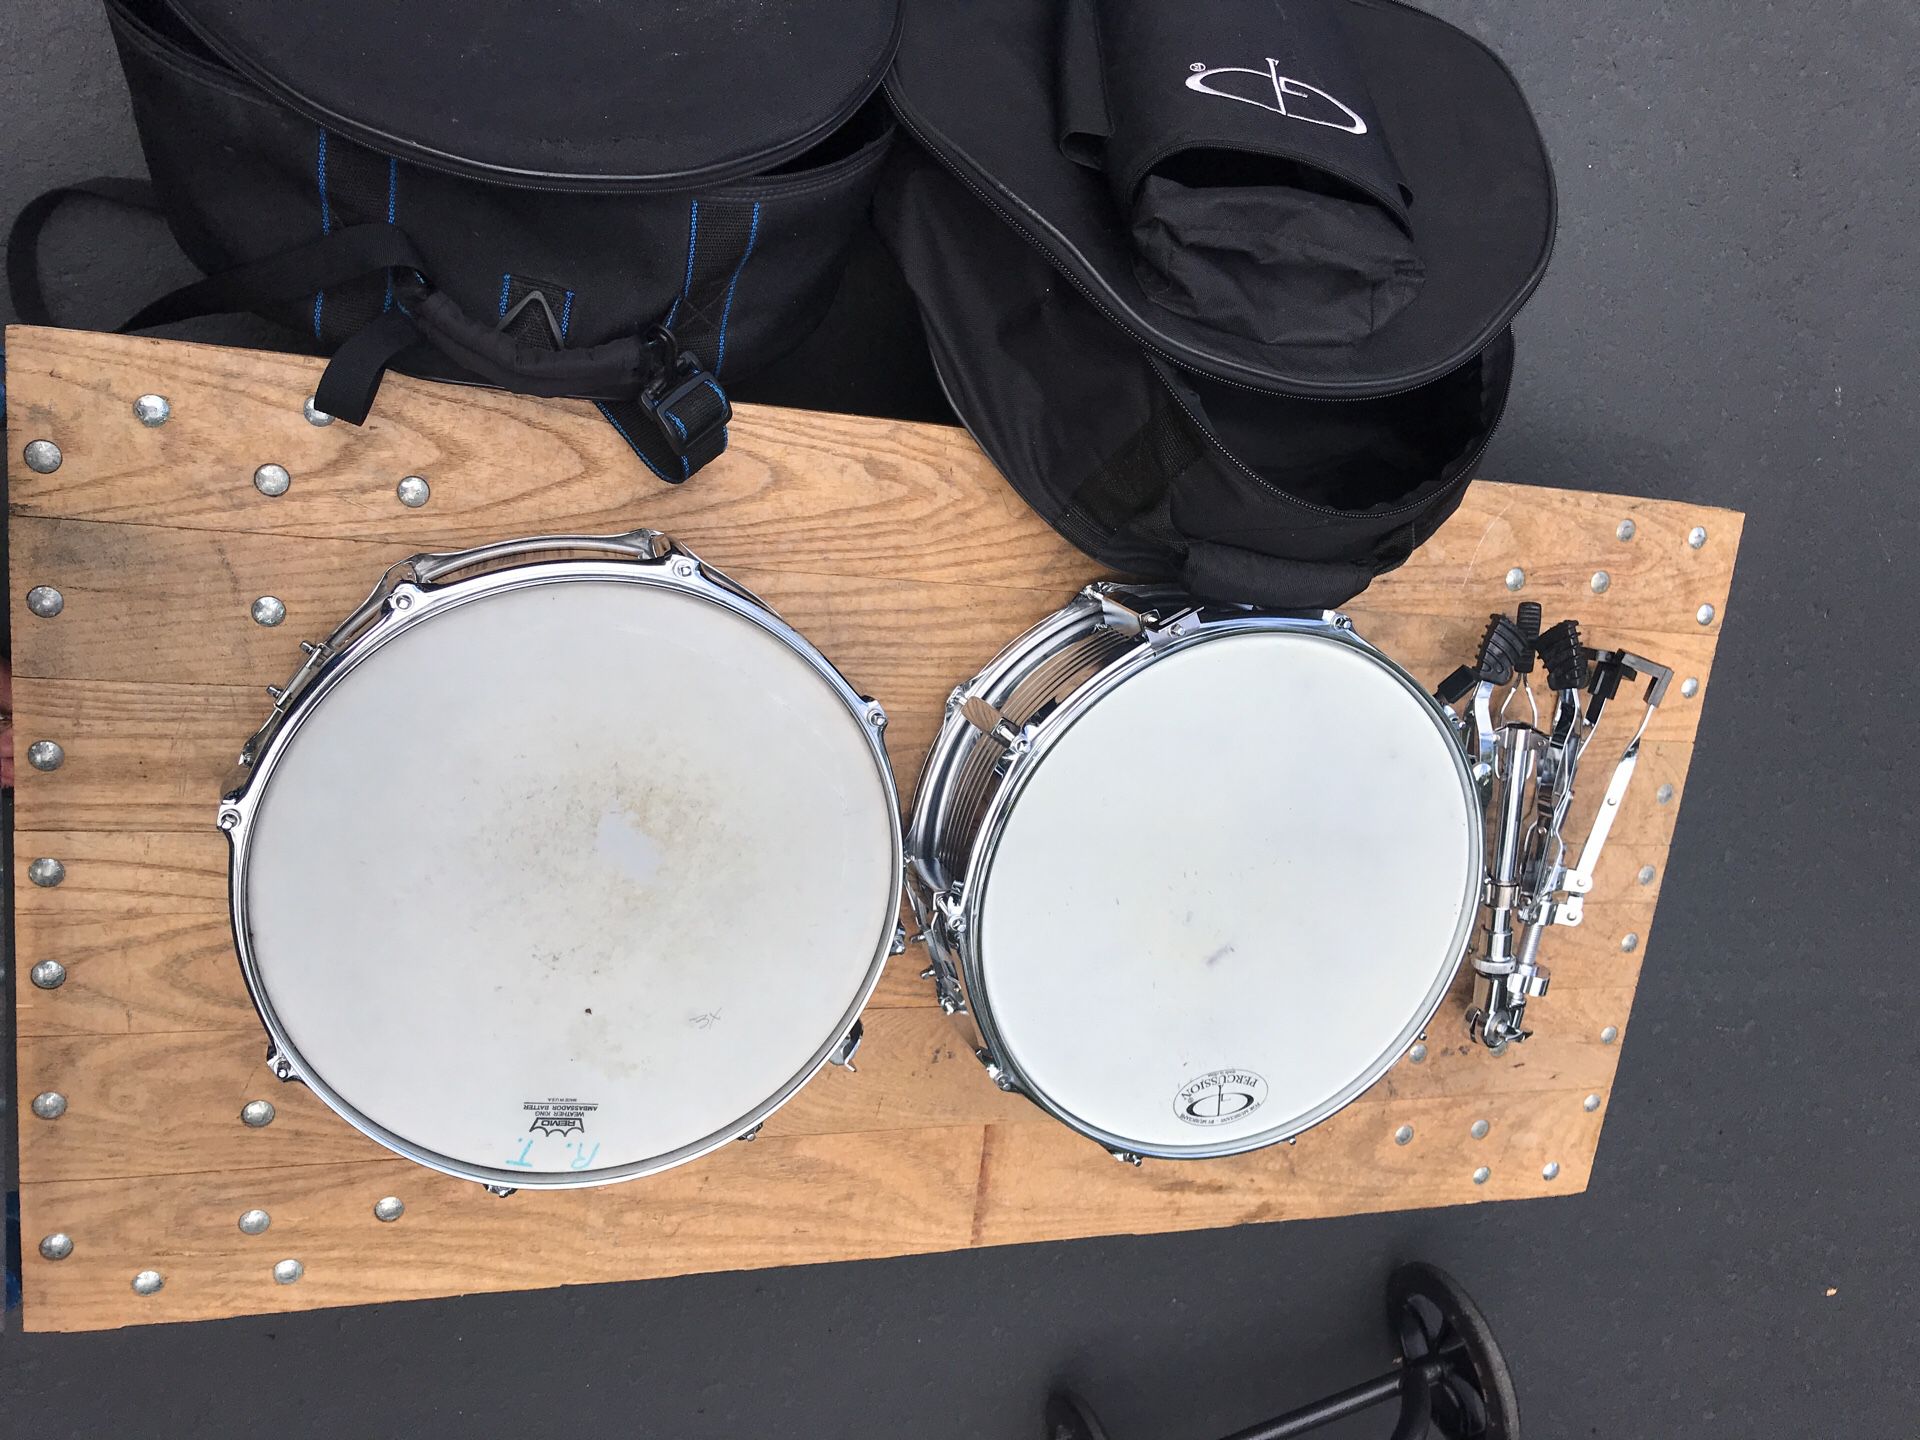 2 drums and one stand